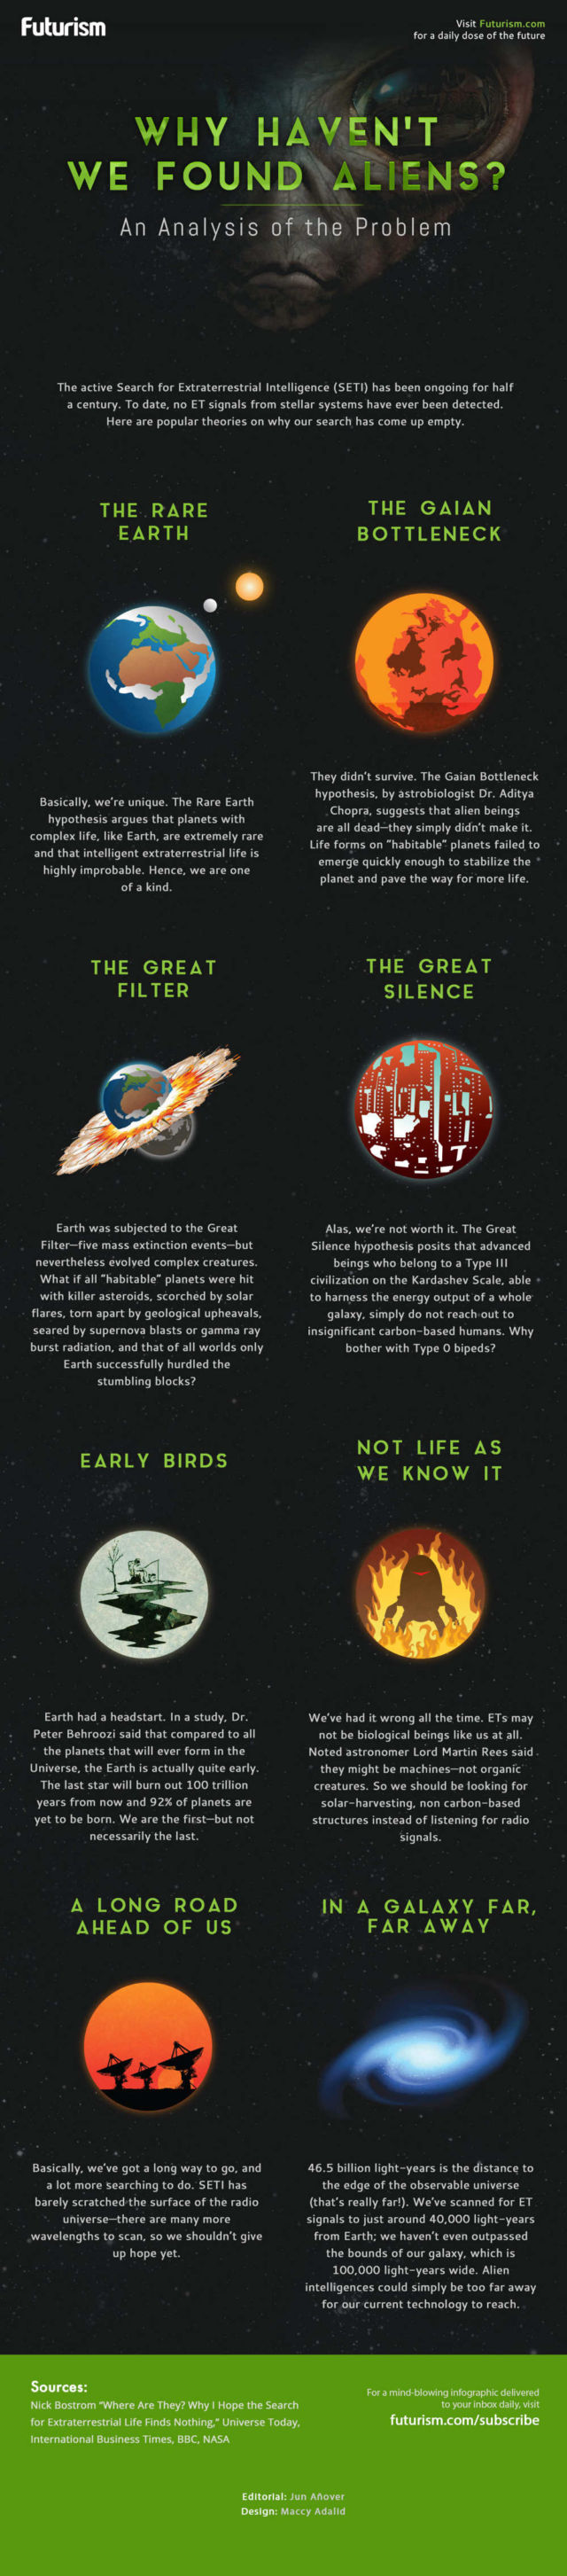 Why Haven’t We Found Aliens - infographic